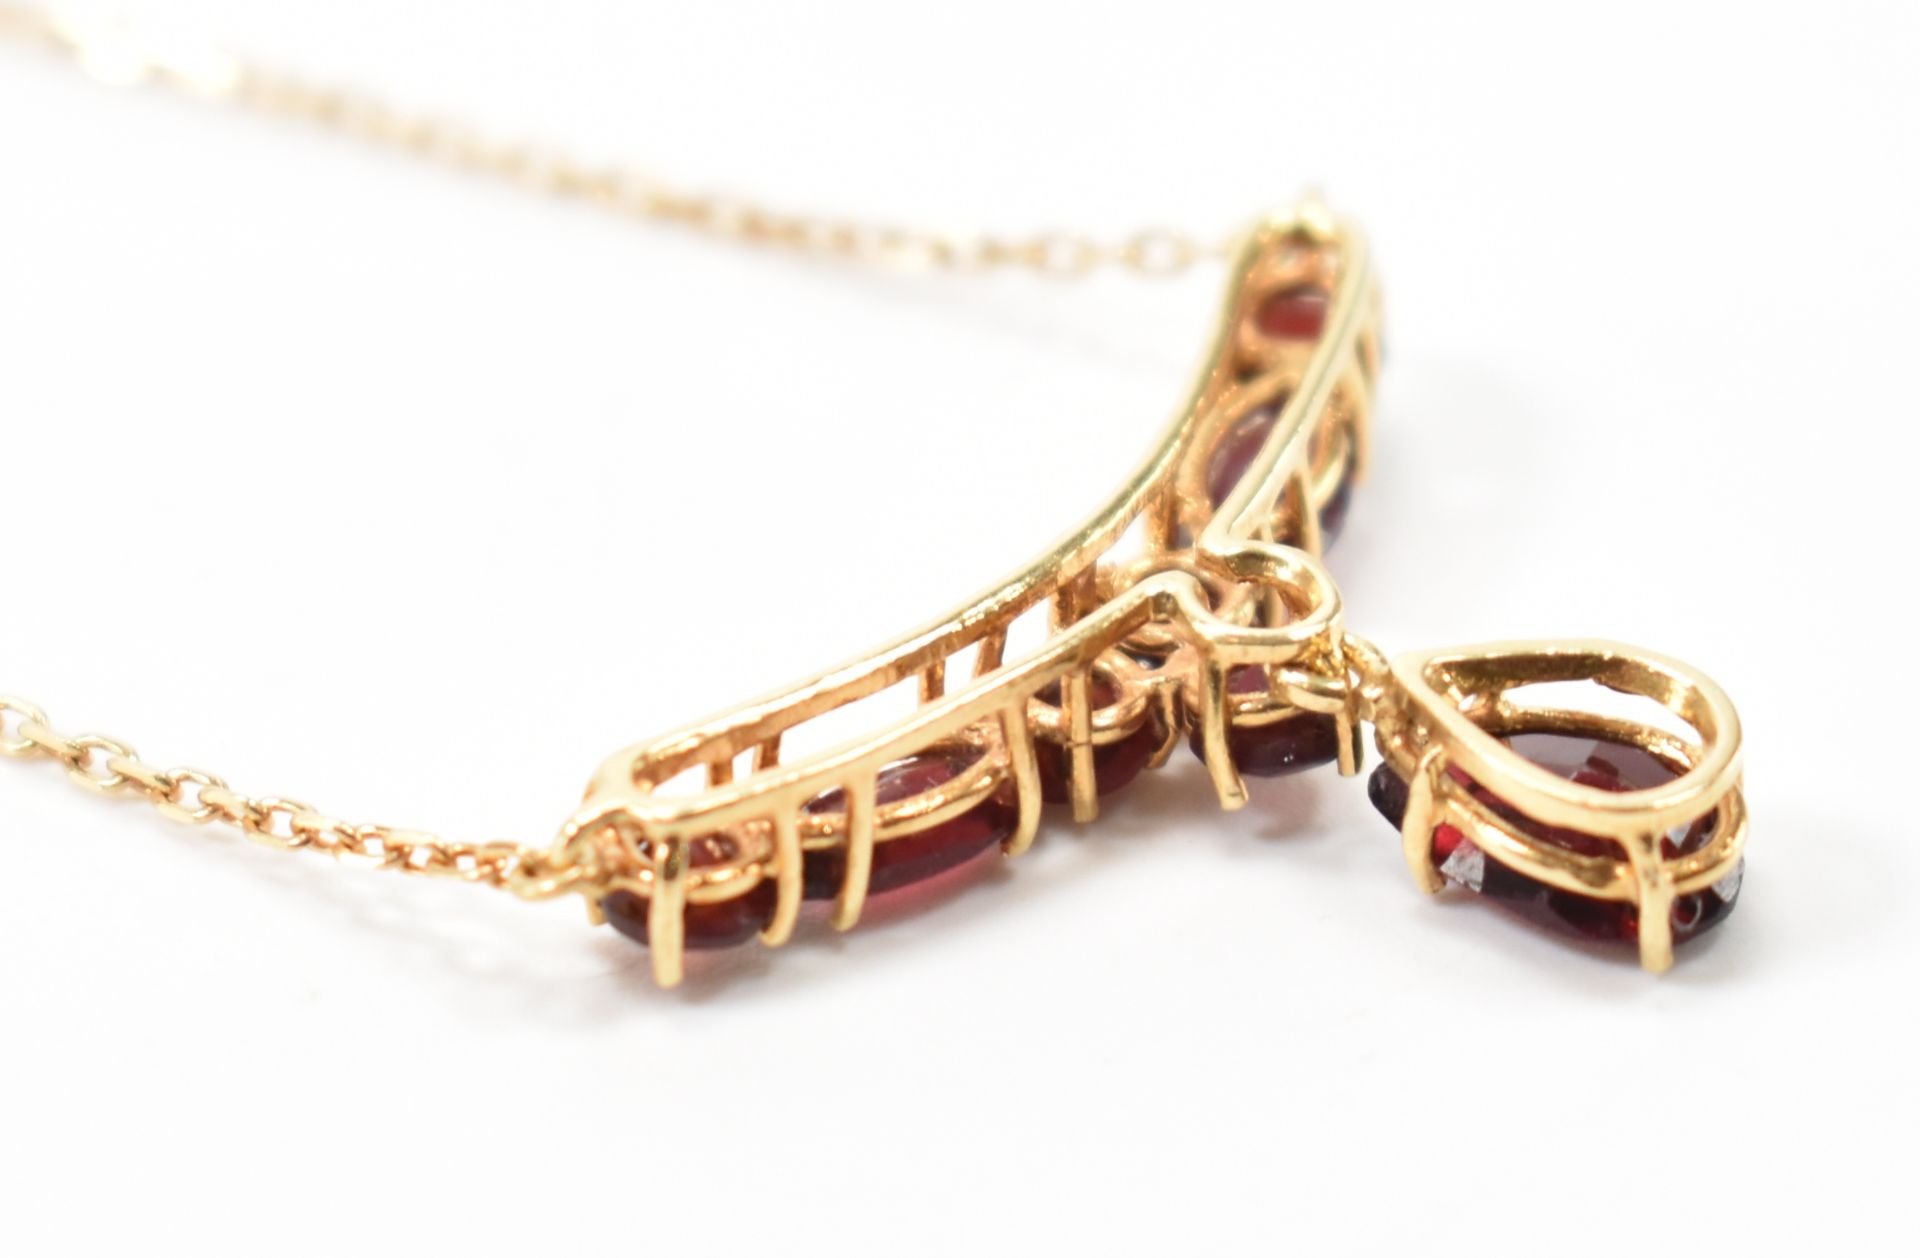 18CT GOLD & RED STONE COLLAR NECKLACE - Image 5 of 7